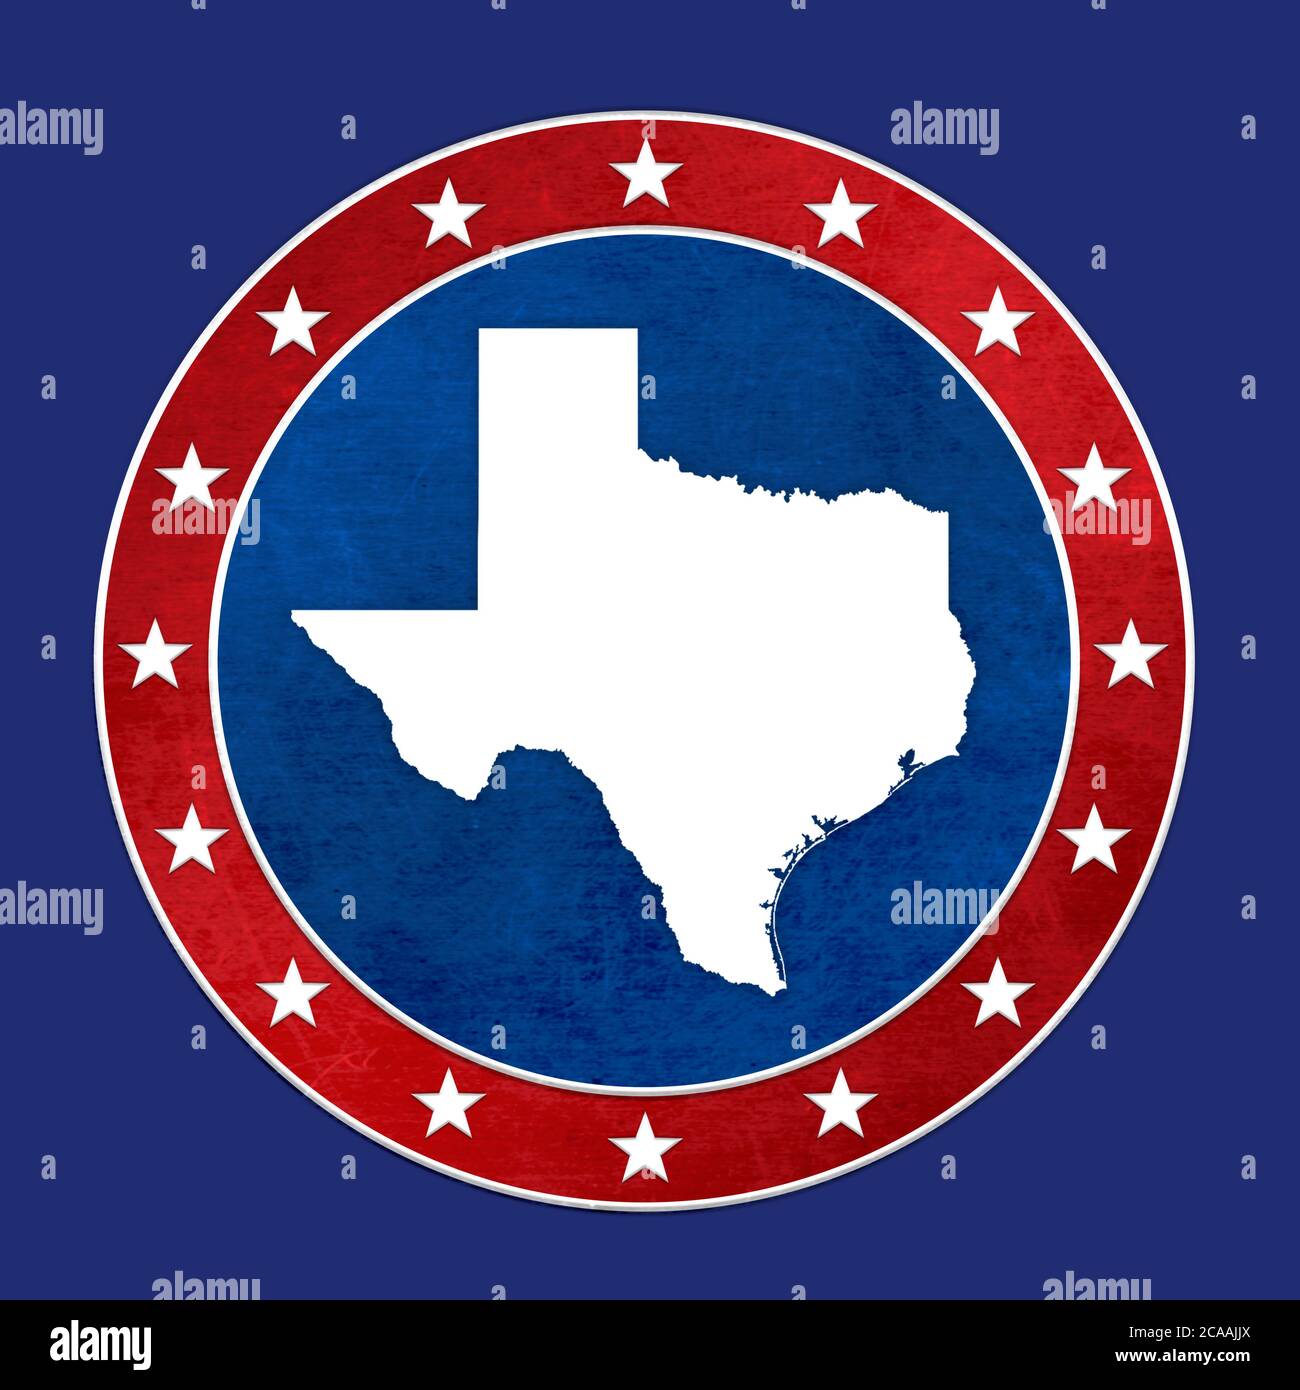 US State of Texas - map illustration Stock Photo